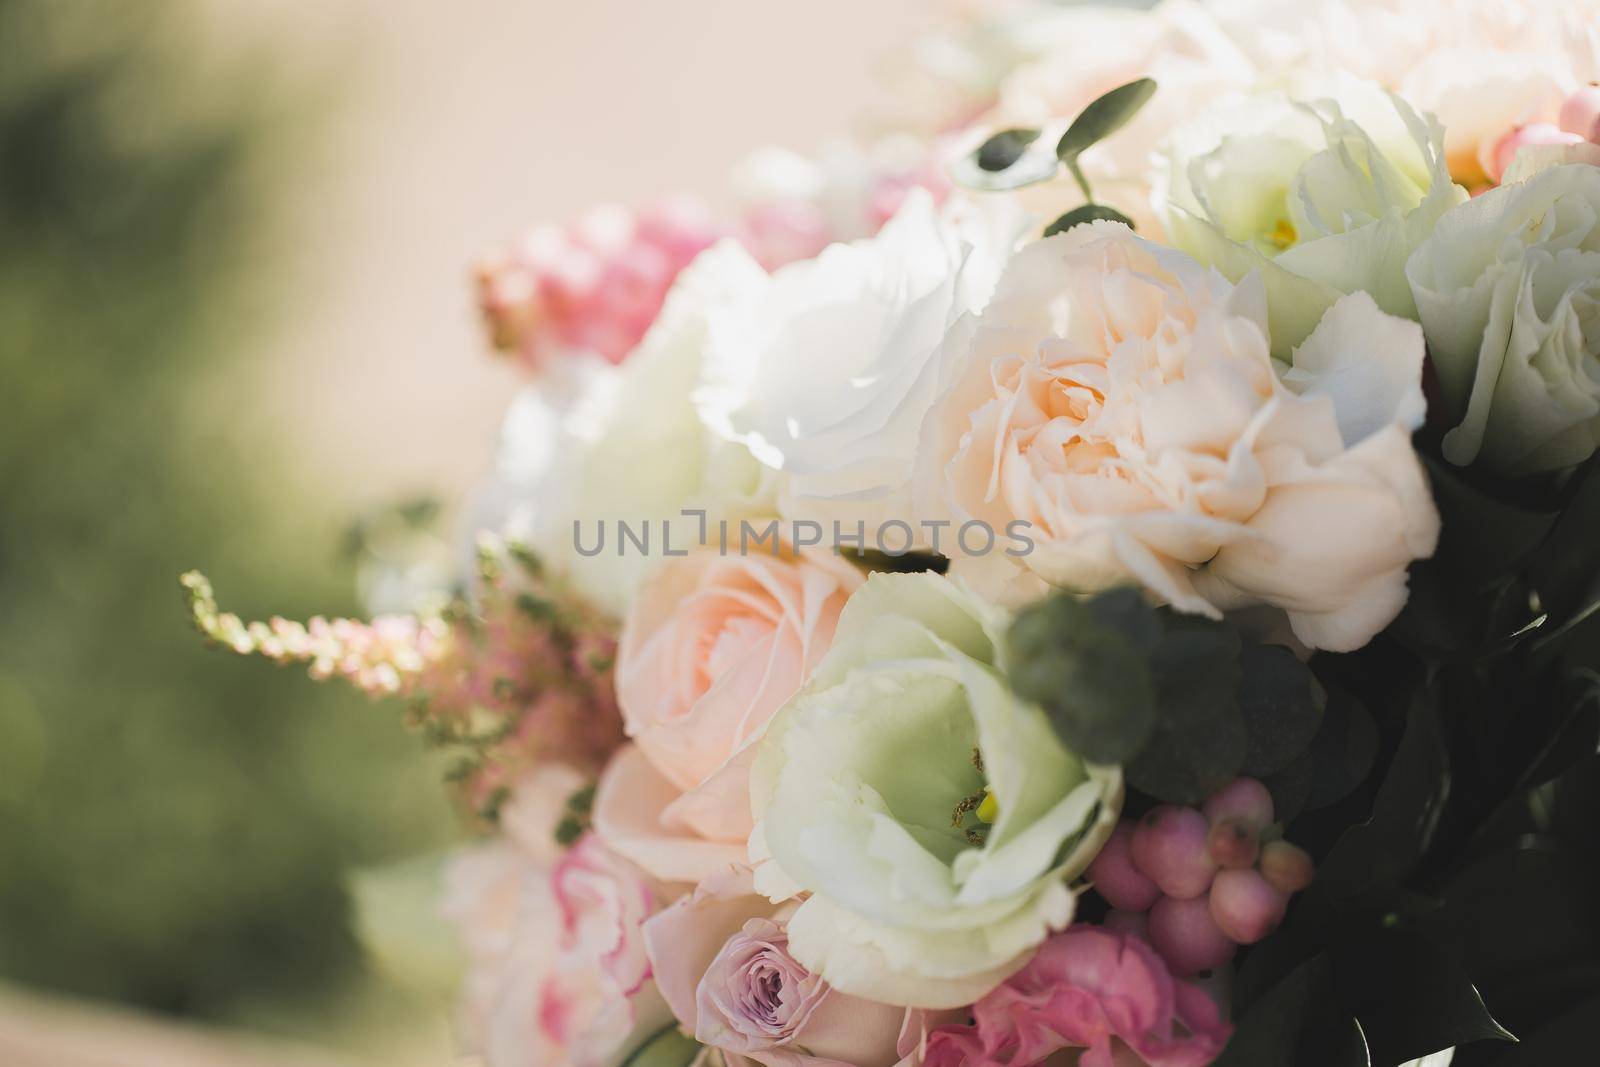 A luxurious delicate wedding bouquet of roses and eustom close-up by StudioPeace